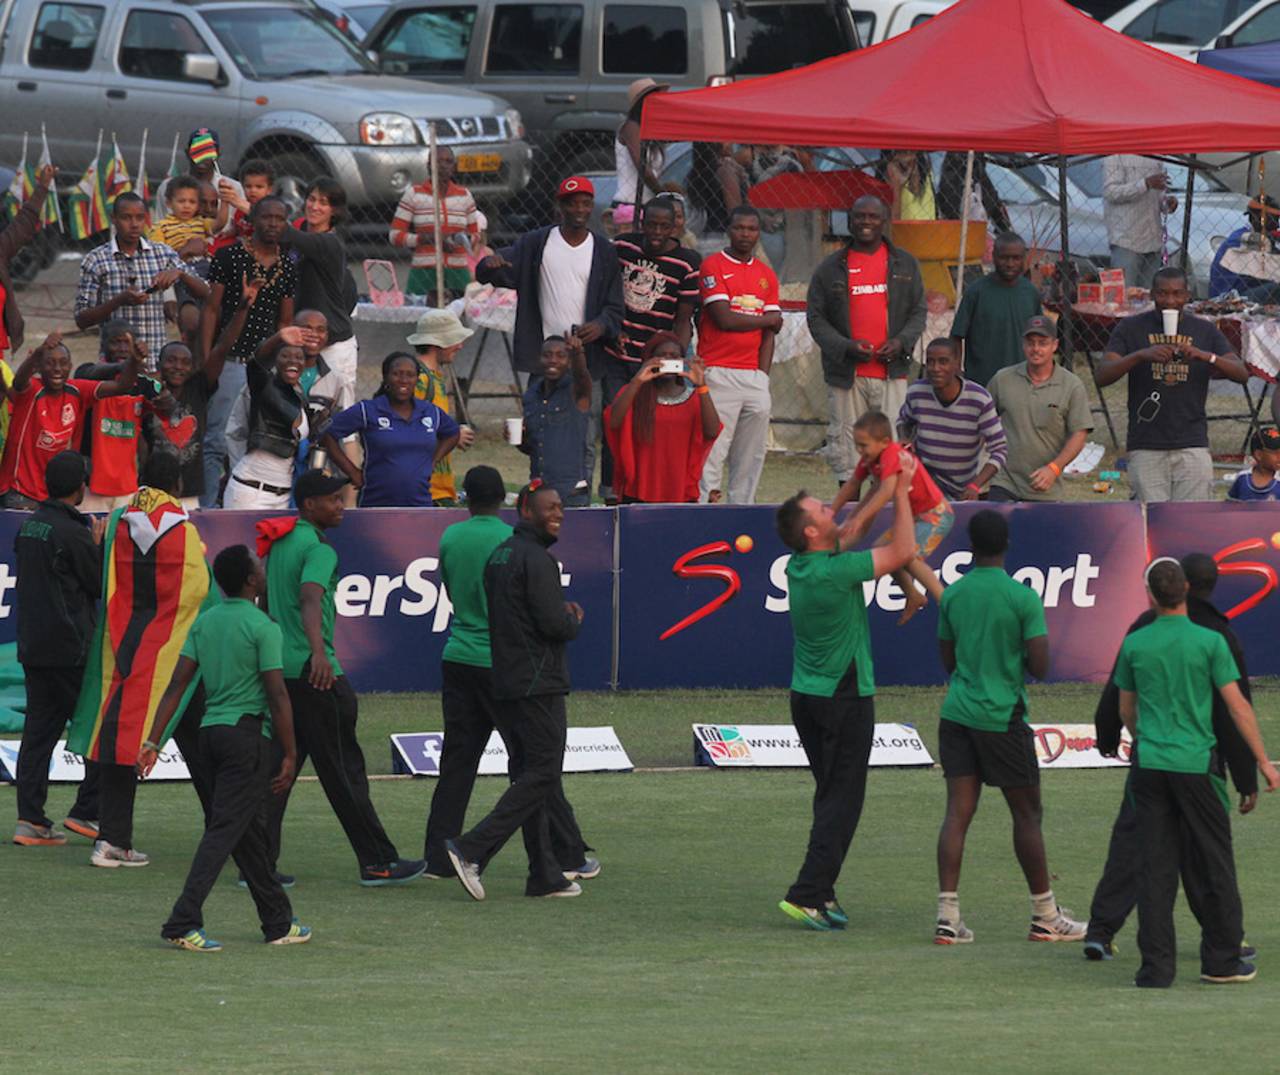 The Zimbabwe players took a victory lap around the ground after a memorable win&nbsp;&nbsp;&bull;&nbsp;&nbsp;Associated Press